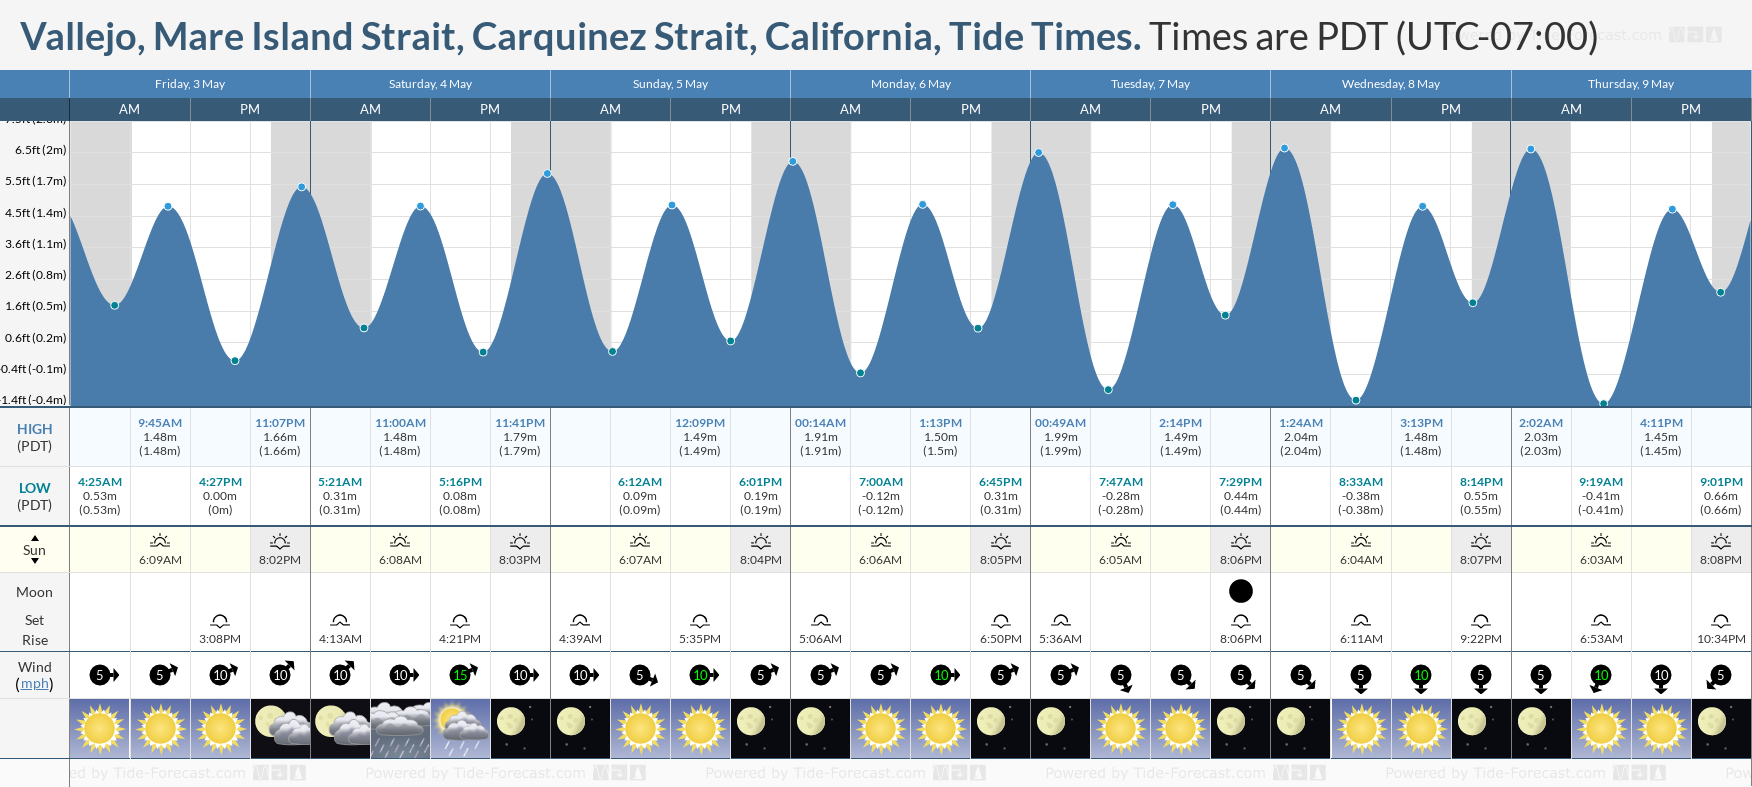 Vallejo, Mare Island Strait, Carquinez Strait, California Tide Chart including high and low tide tide times for the next 7 days